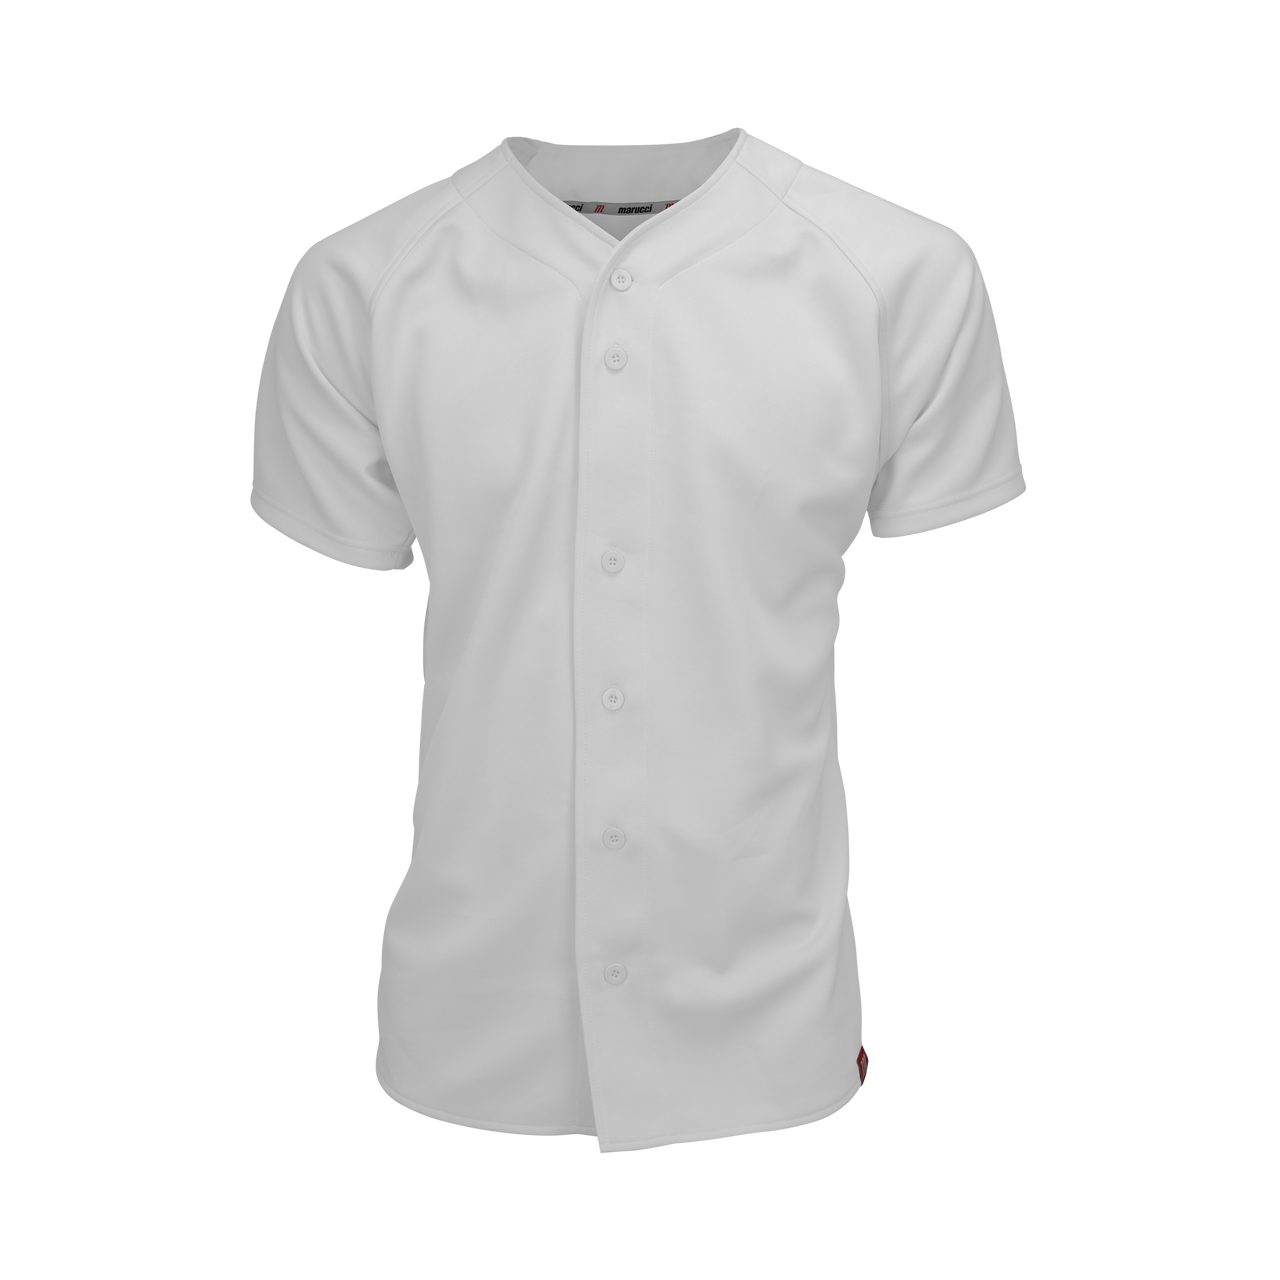 Marucci Youth Full Button Jersey White Small